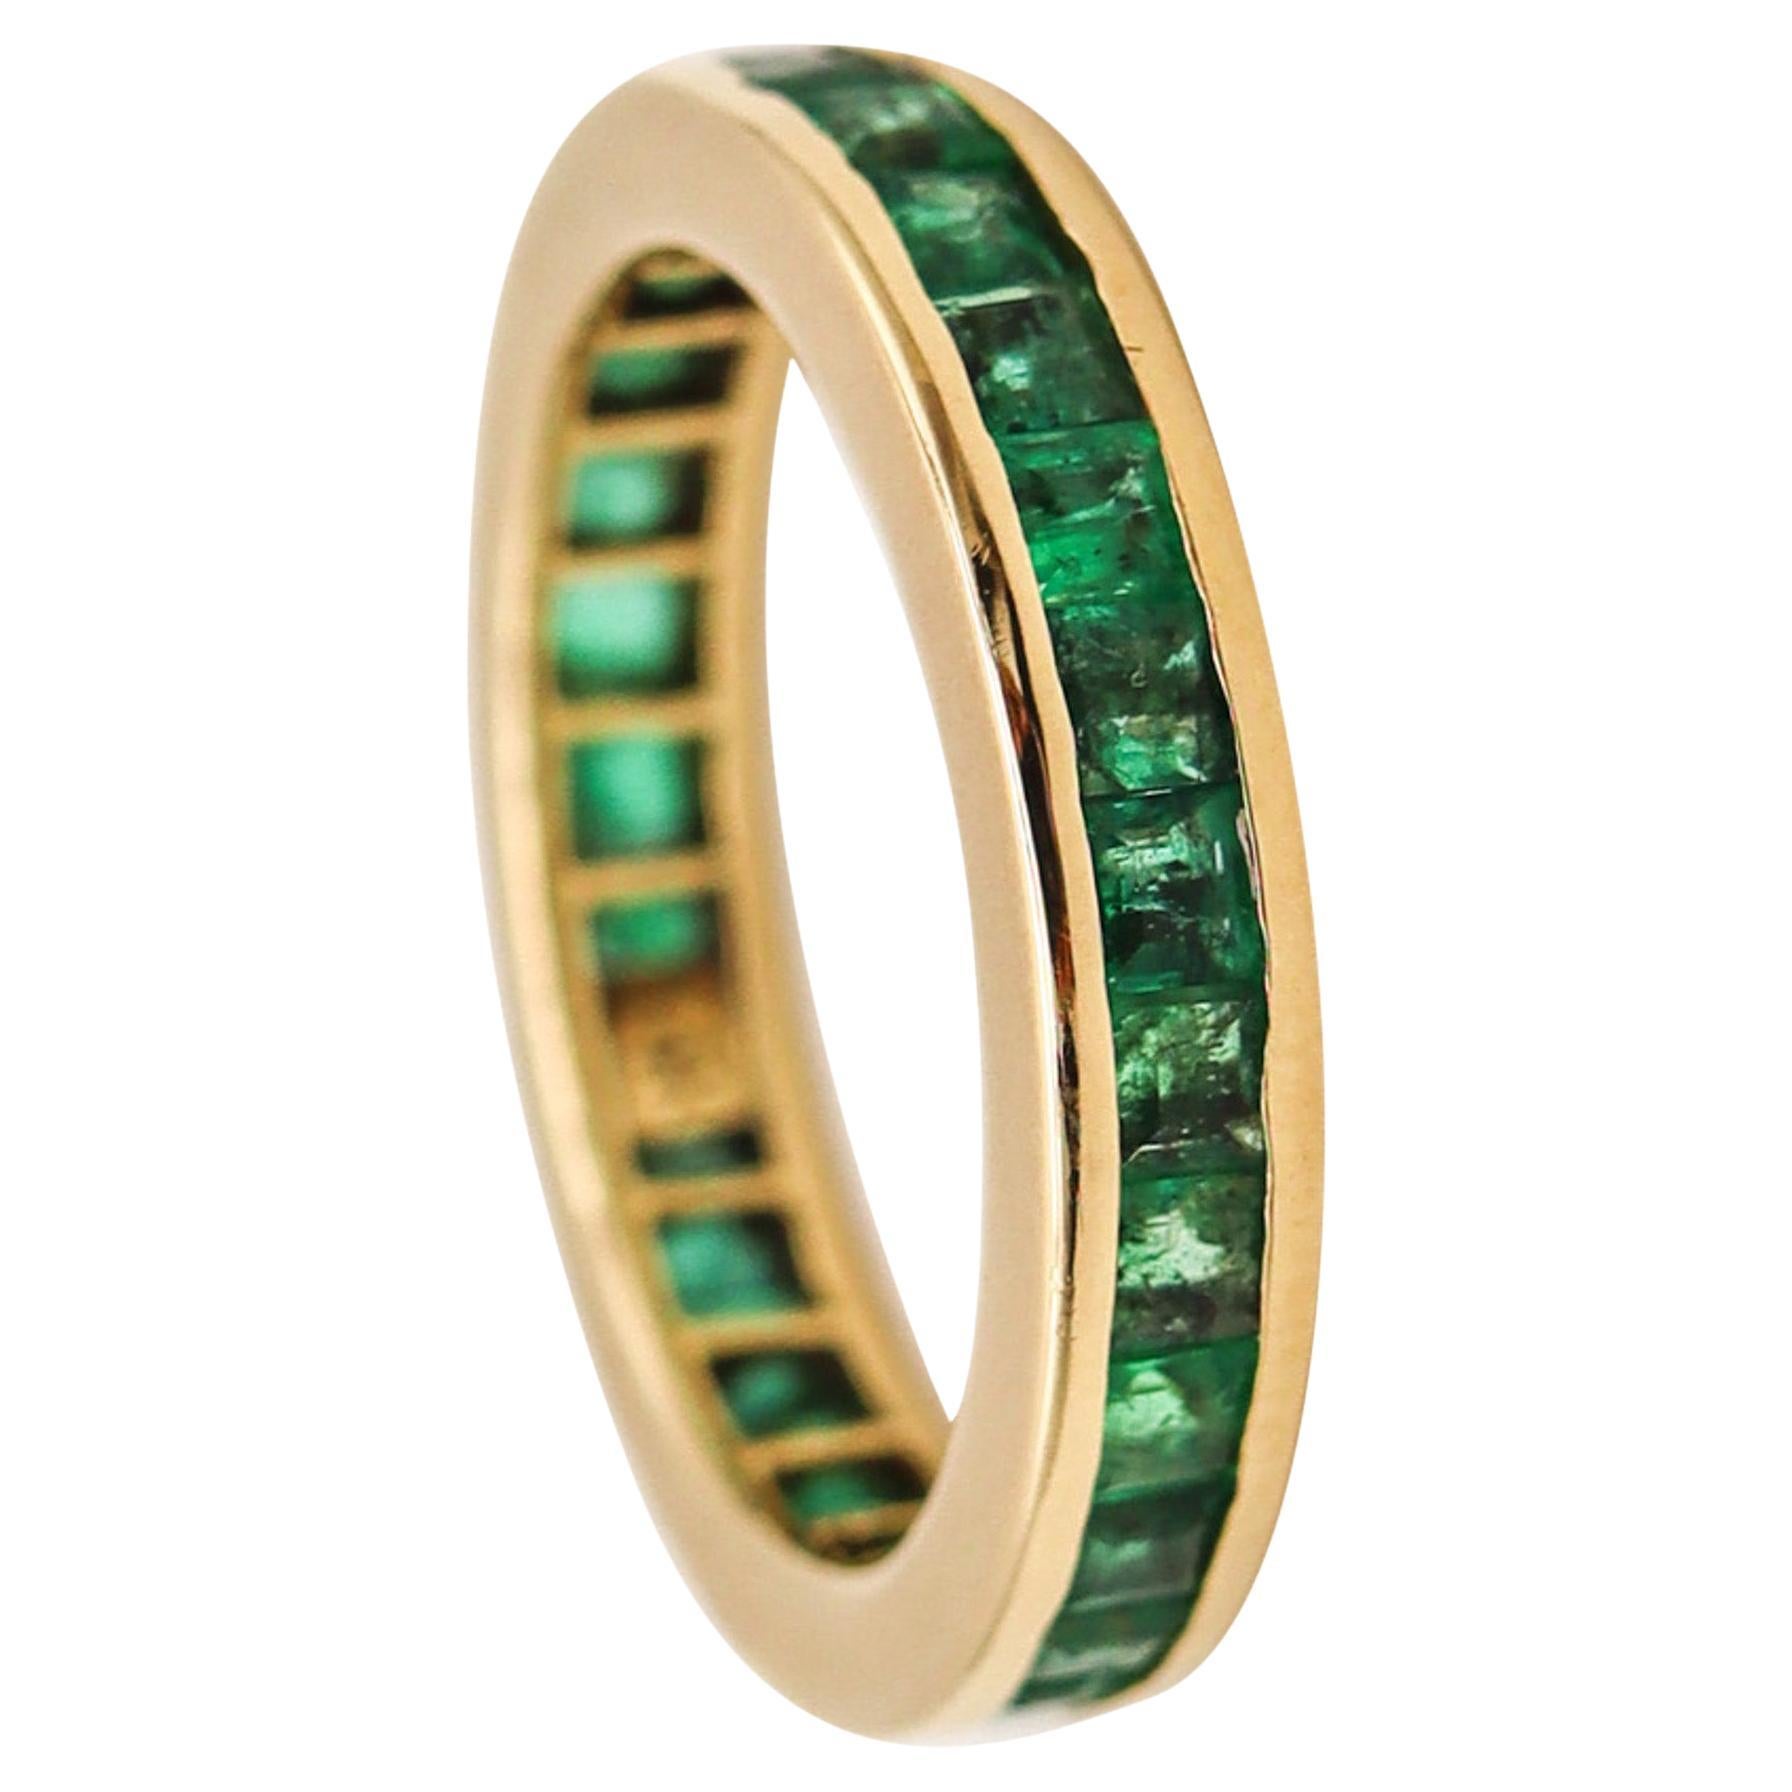 Italian Eternity Ring Band In 14 Kt Yellow Gold With 2.10 Ctw In Vivid Emeralds For Sale